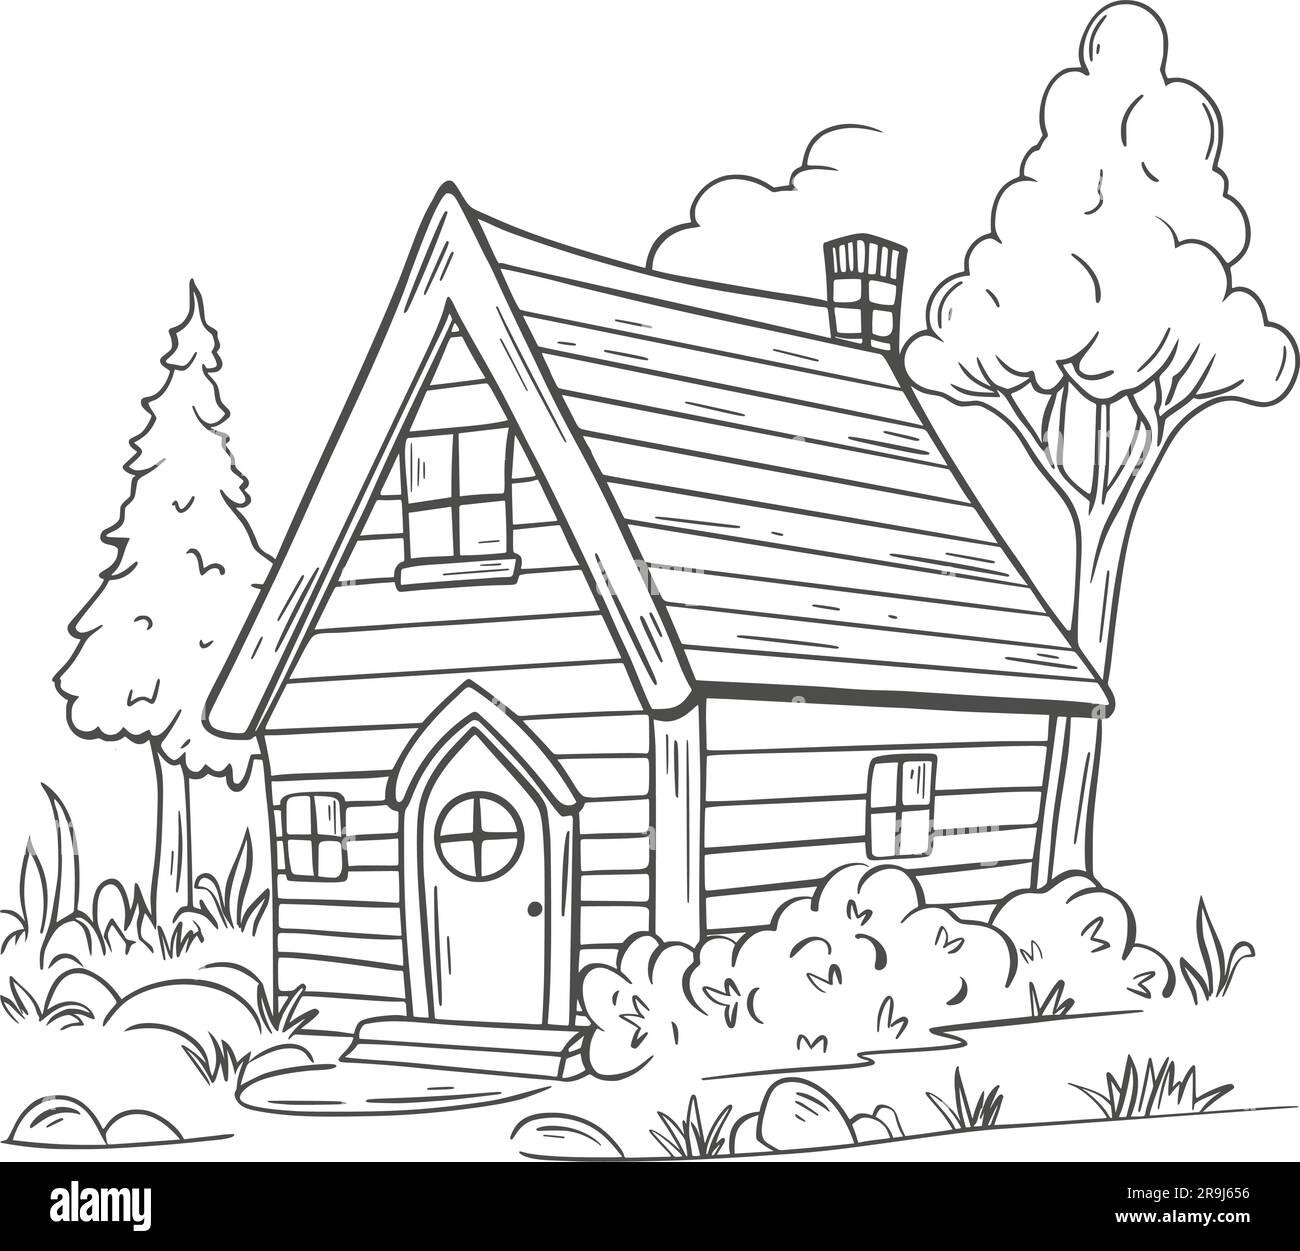 Hand drawn wooden village house. Sketch house with trees, bushes and herbs. Rustic cottage, cartoon, vector illustration Stock Vector